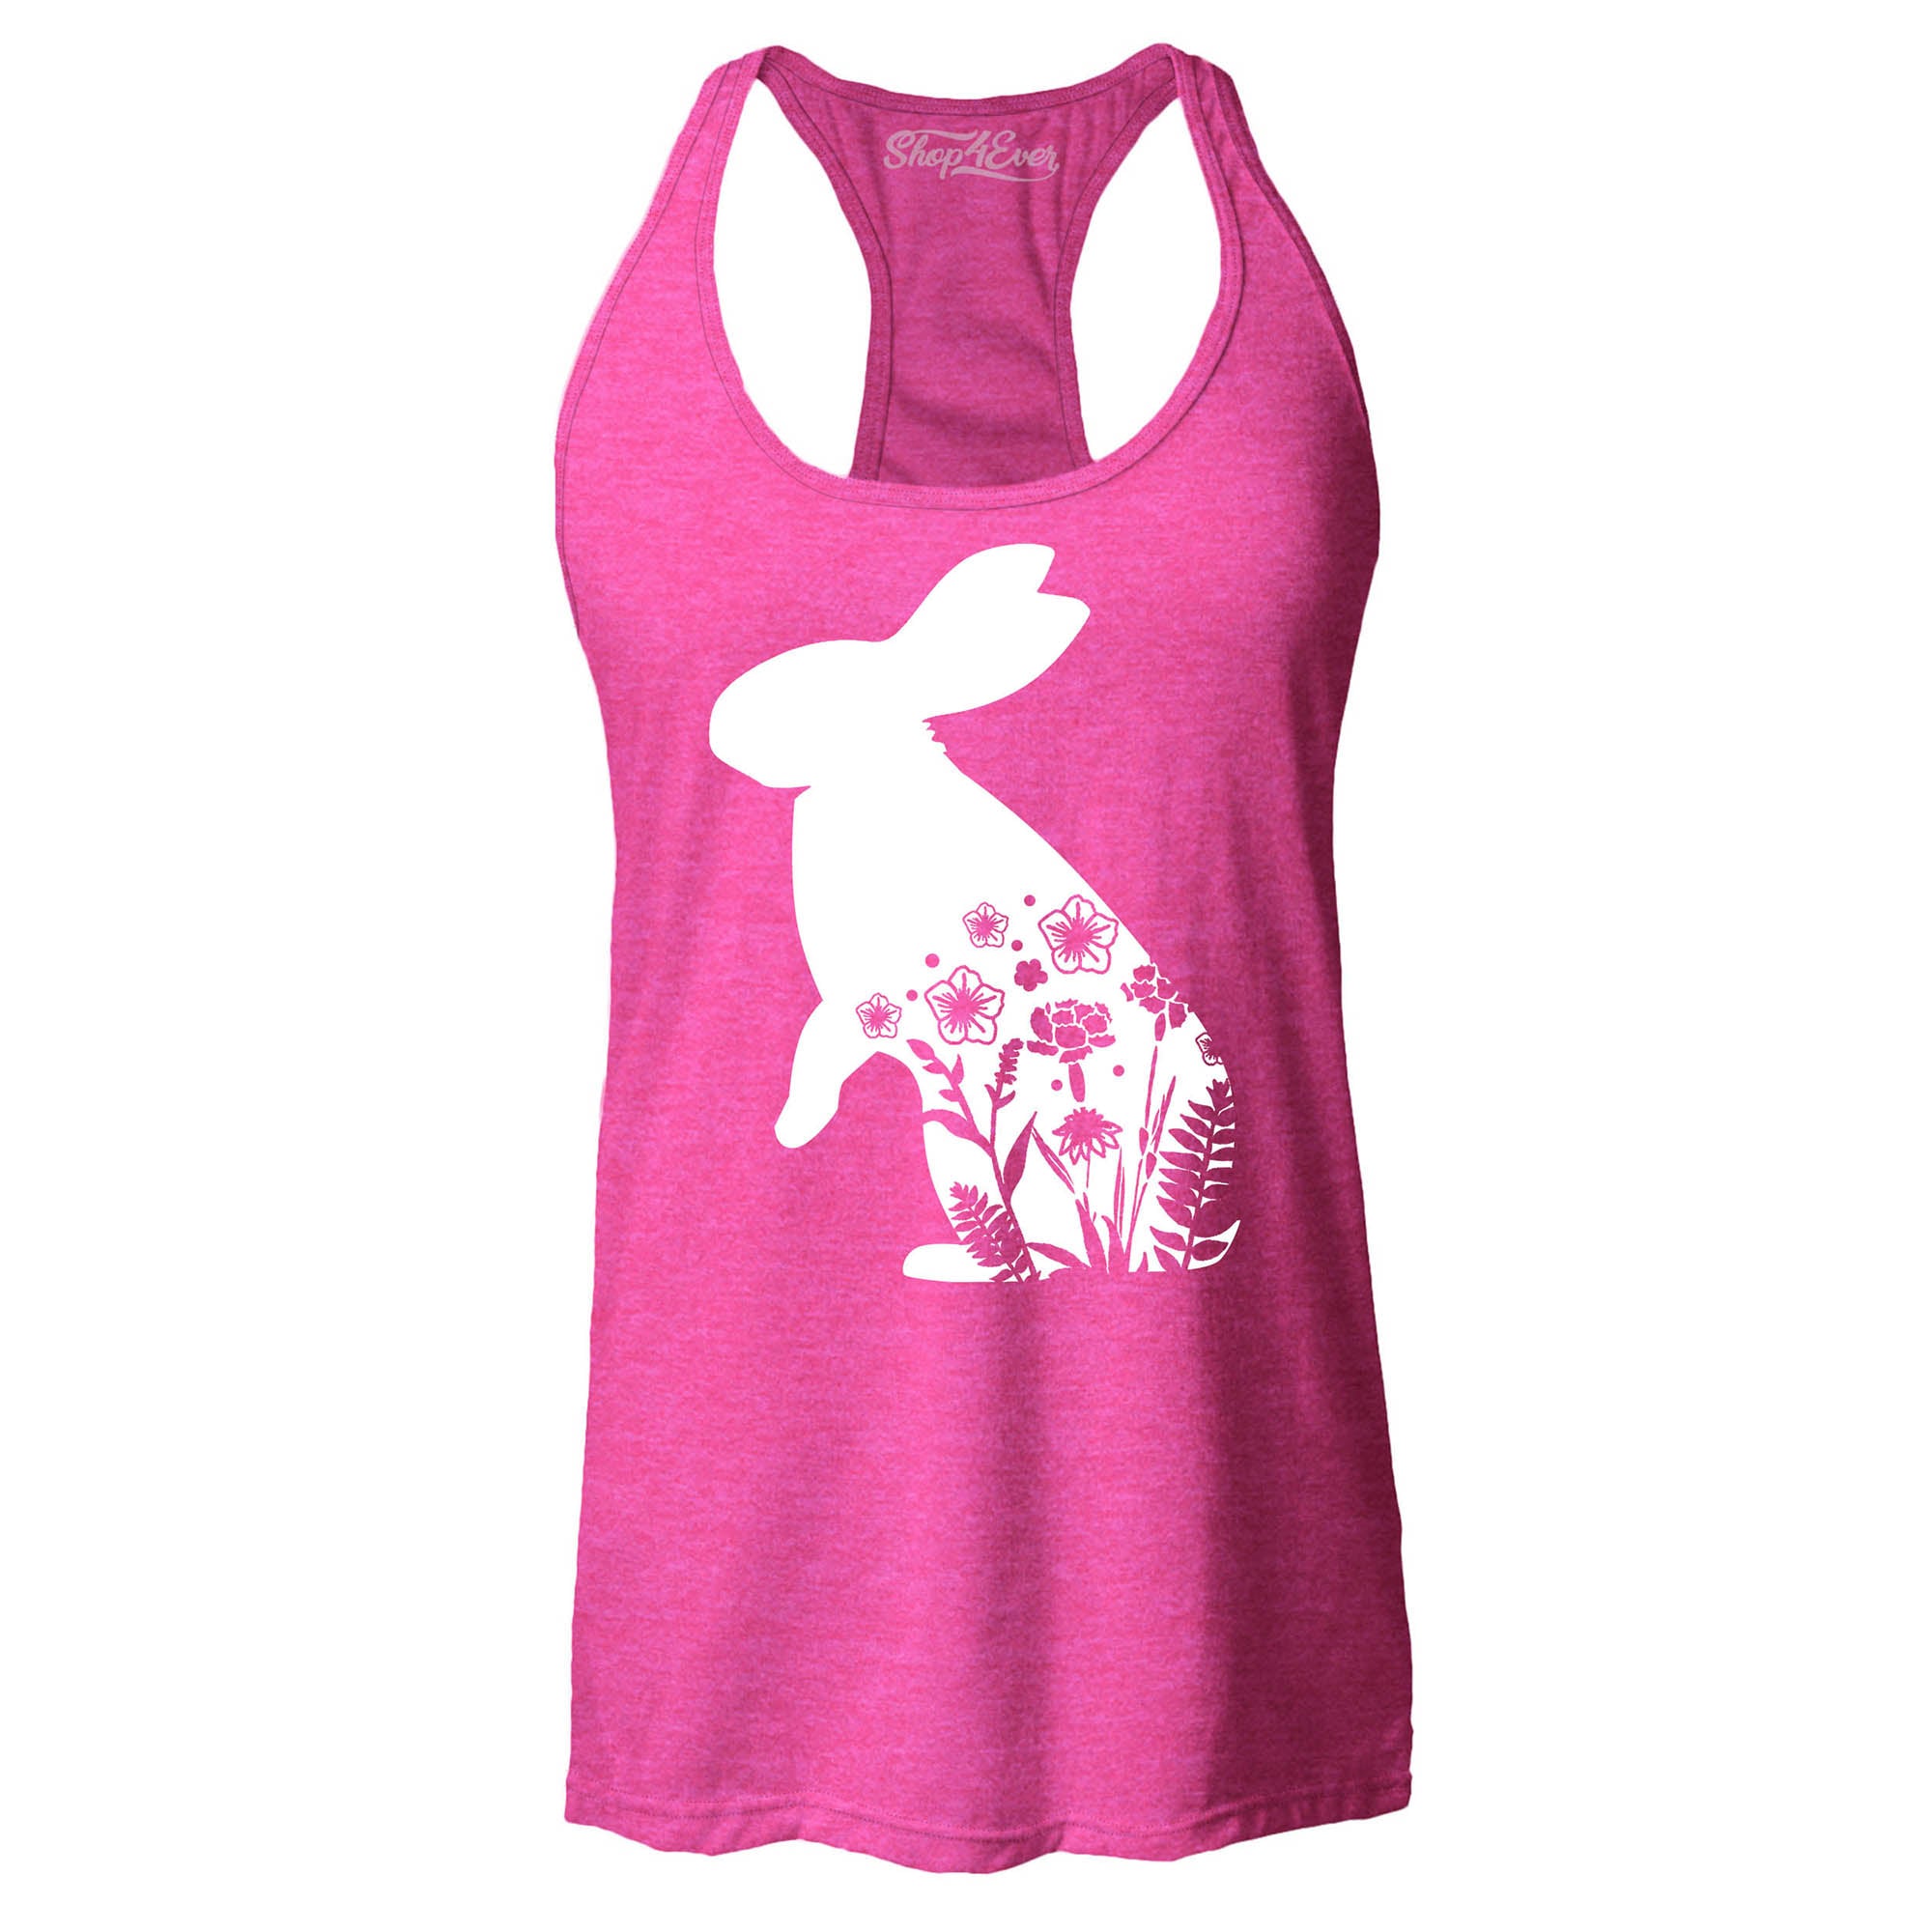 Floral Easter Bunny Rabbit with Spring Flowers Women's Racerback Tank Top Slim Fit